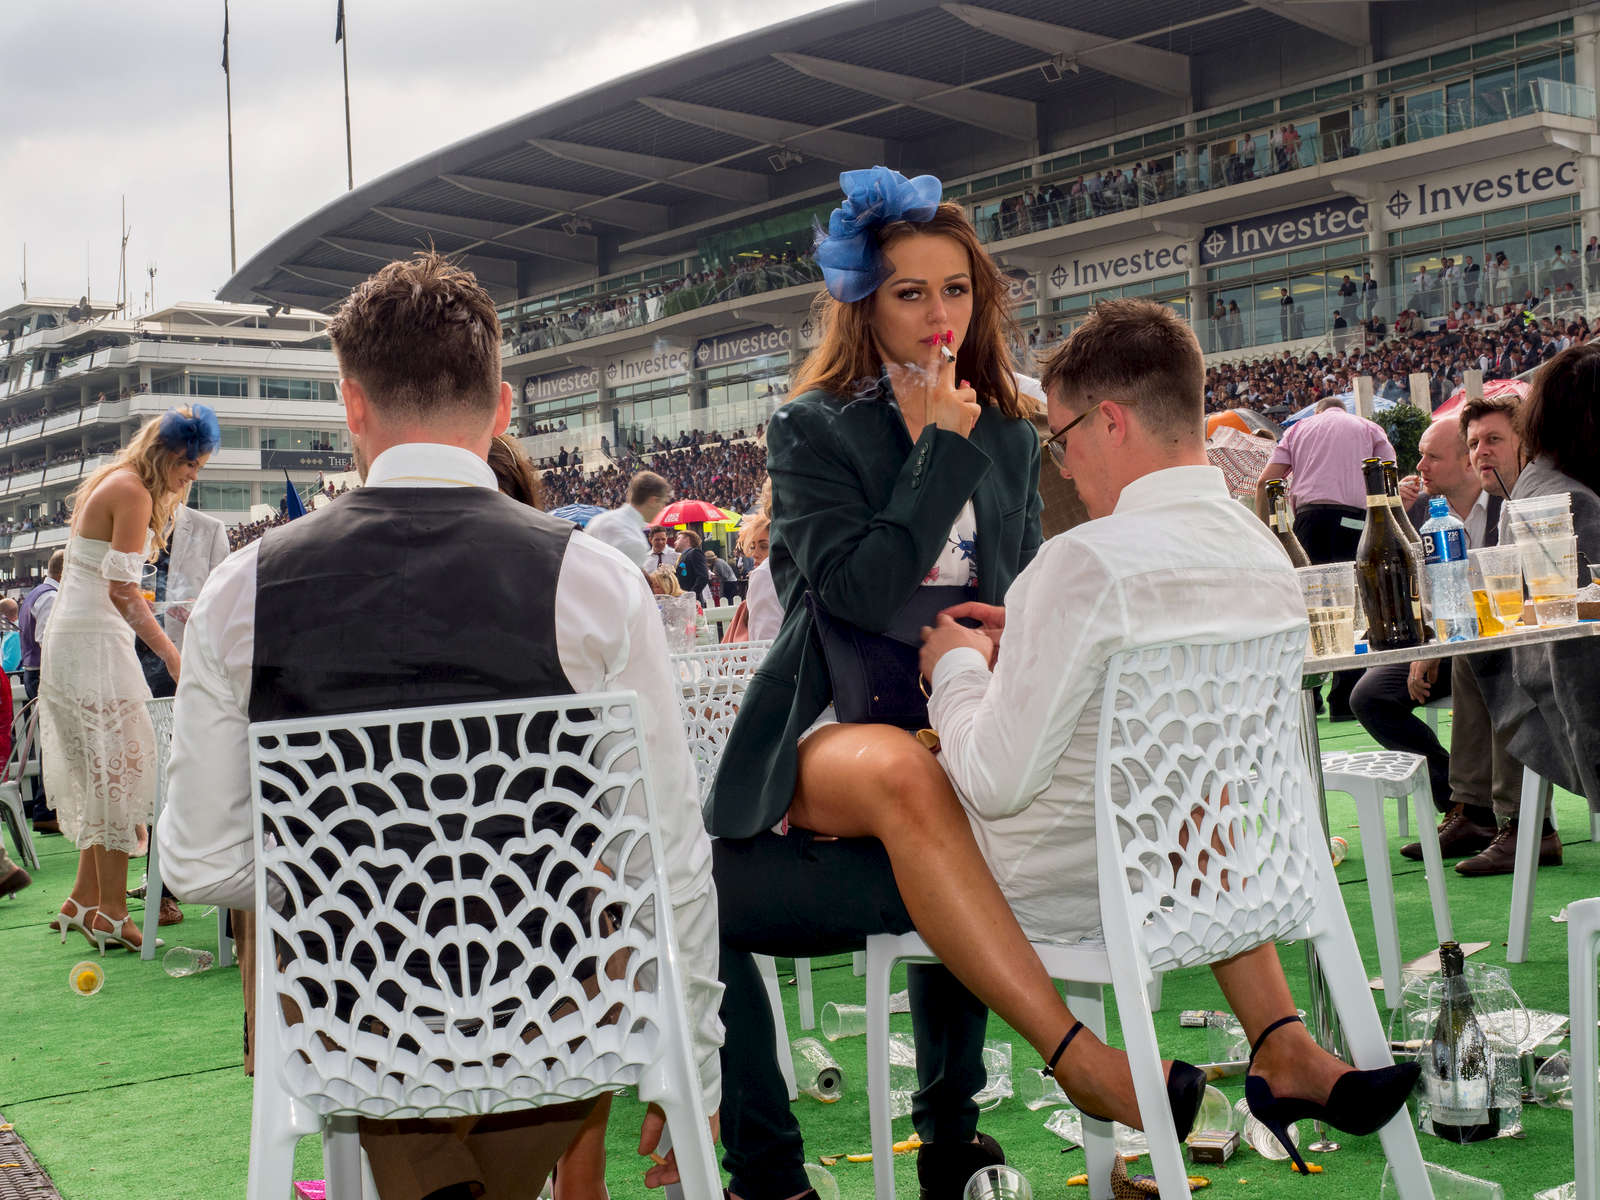 A young woman smokes a cigarette straddled across a man's lap on Ladies' Day at Epsom.Ladies' Day is traditionally held on the first Friday of June, a multitude of ladies and gents head to Epsom Downs Racecourse to experience a day full of high octane racing, music, glamour and fashion.